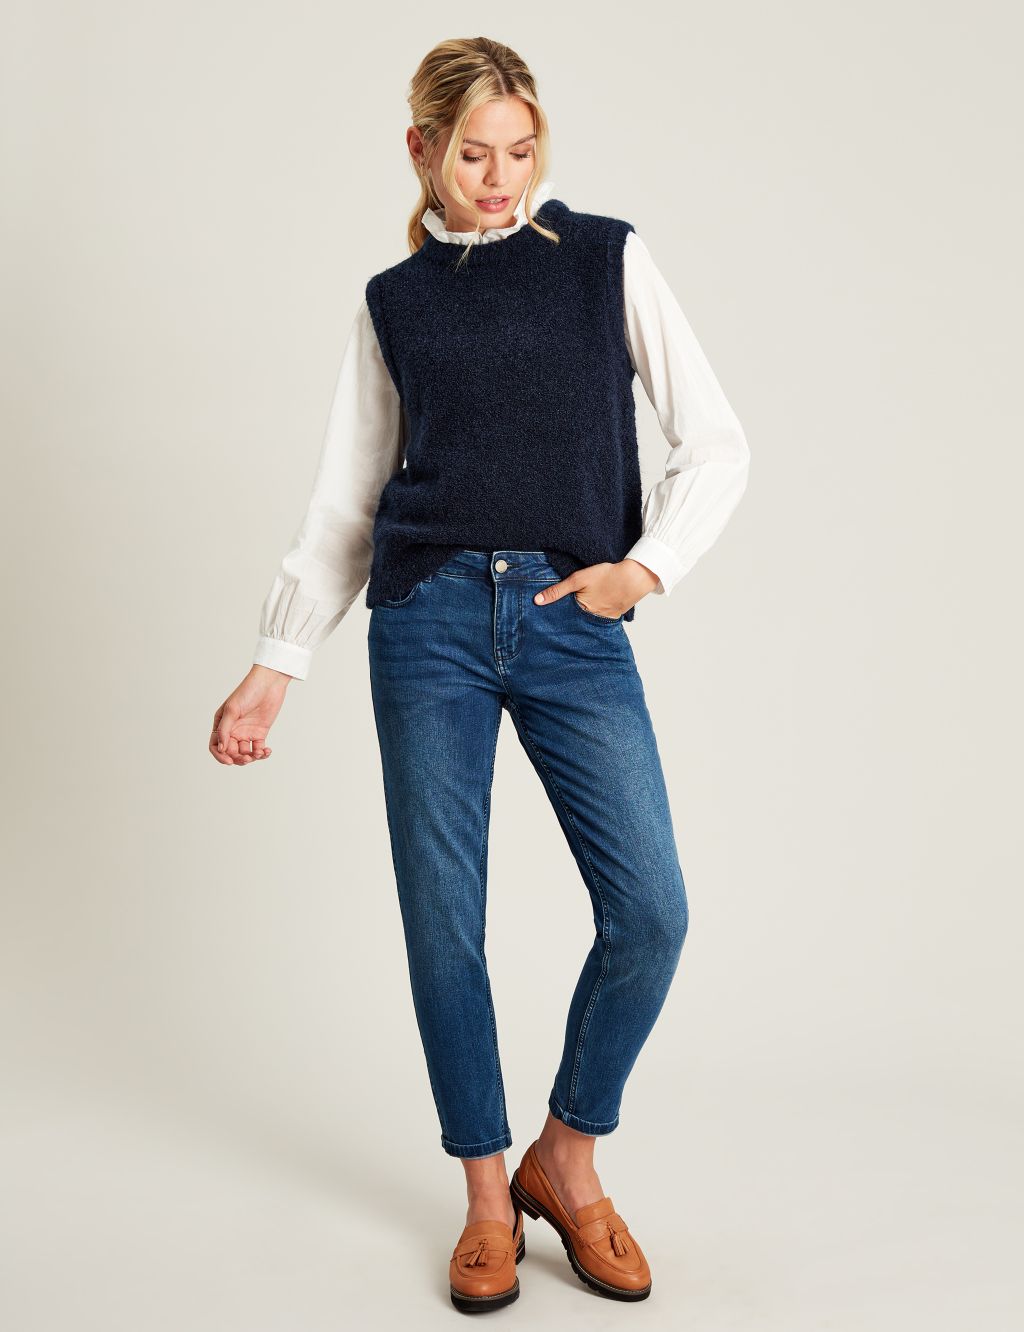 Textured Crew Neck Knitted Vest image 3